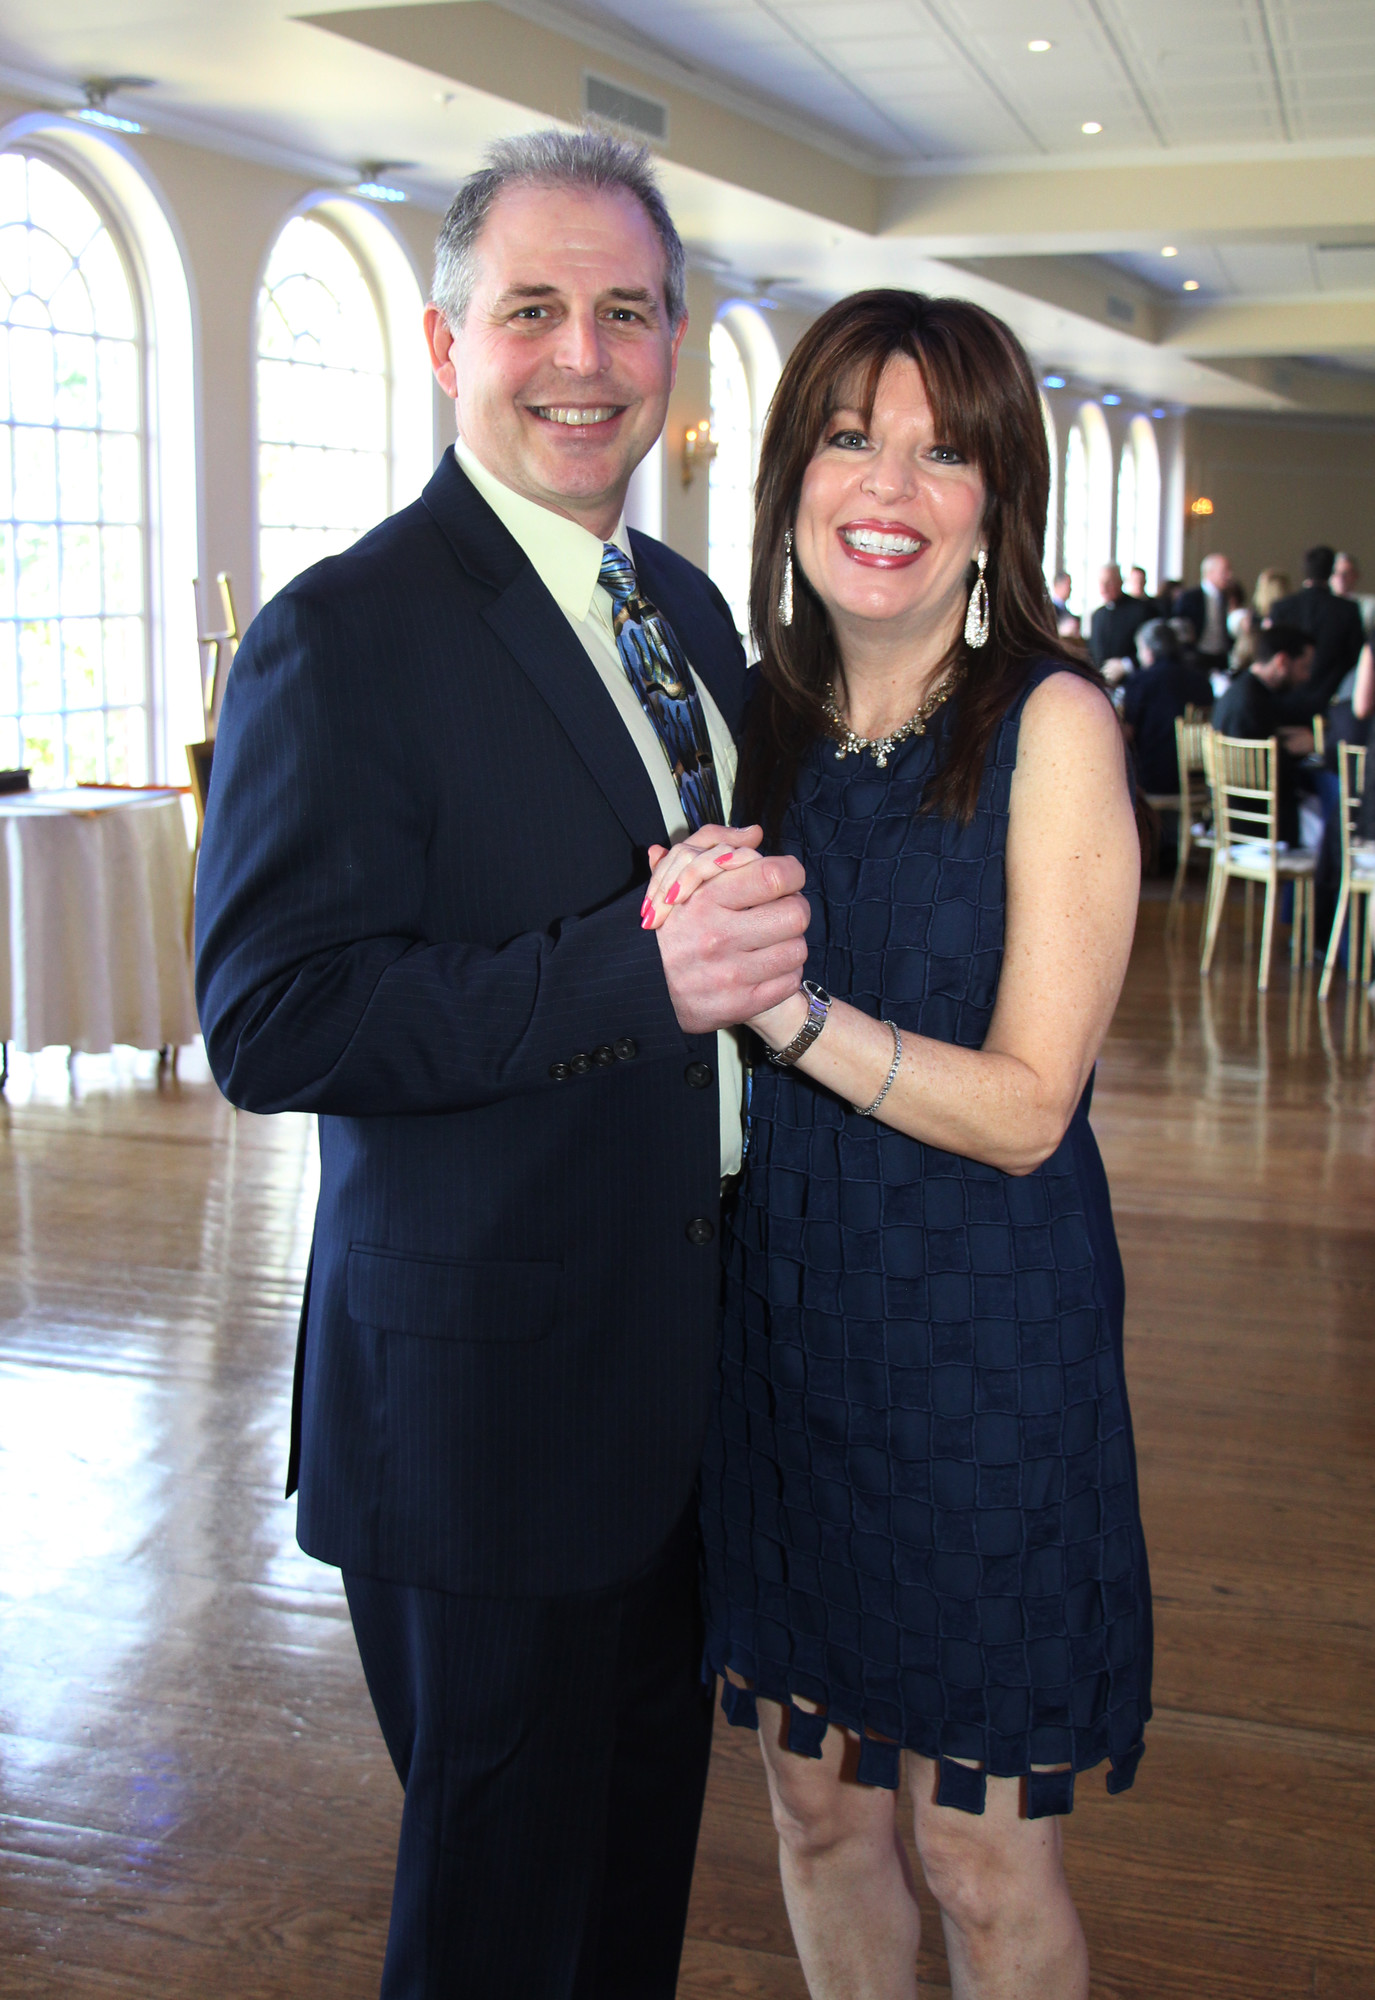 Steve Sciortino with his wife Robin shared a dance at the gala.